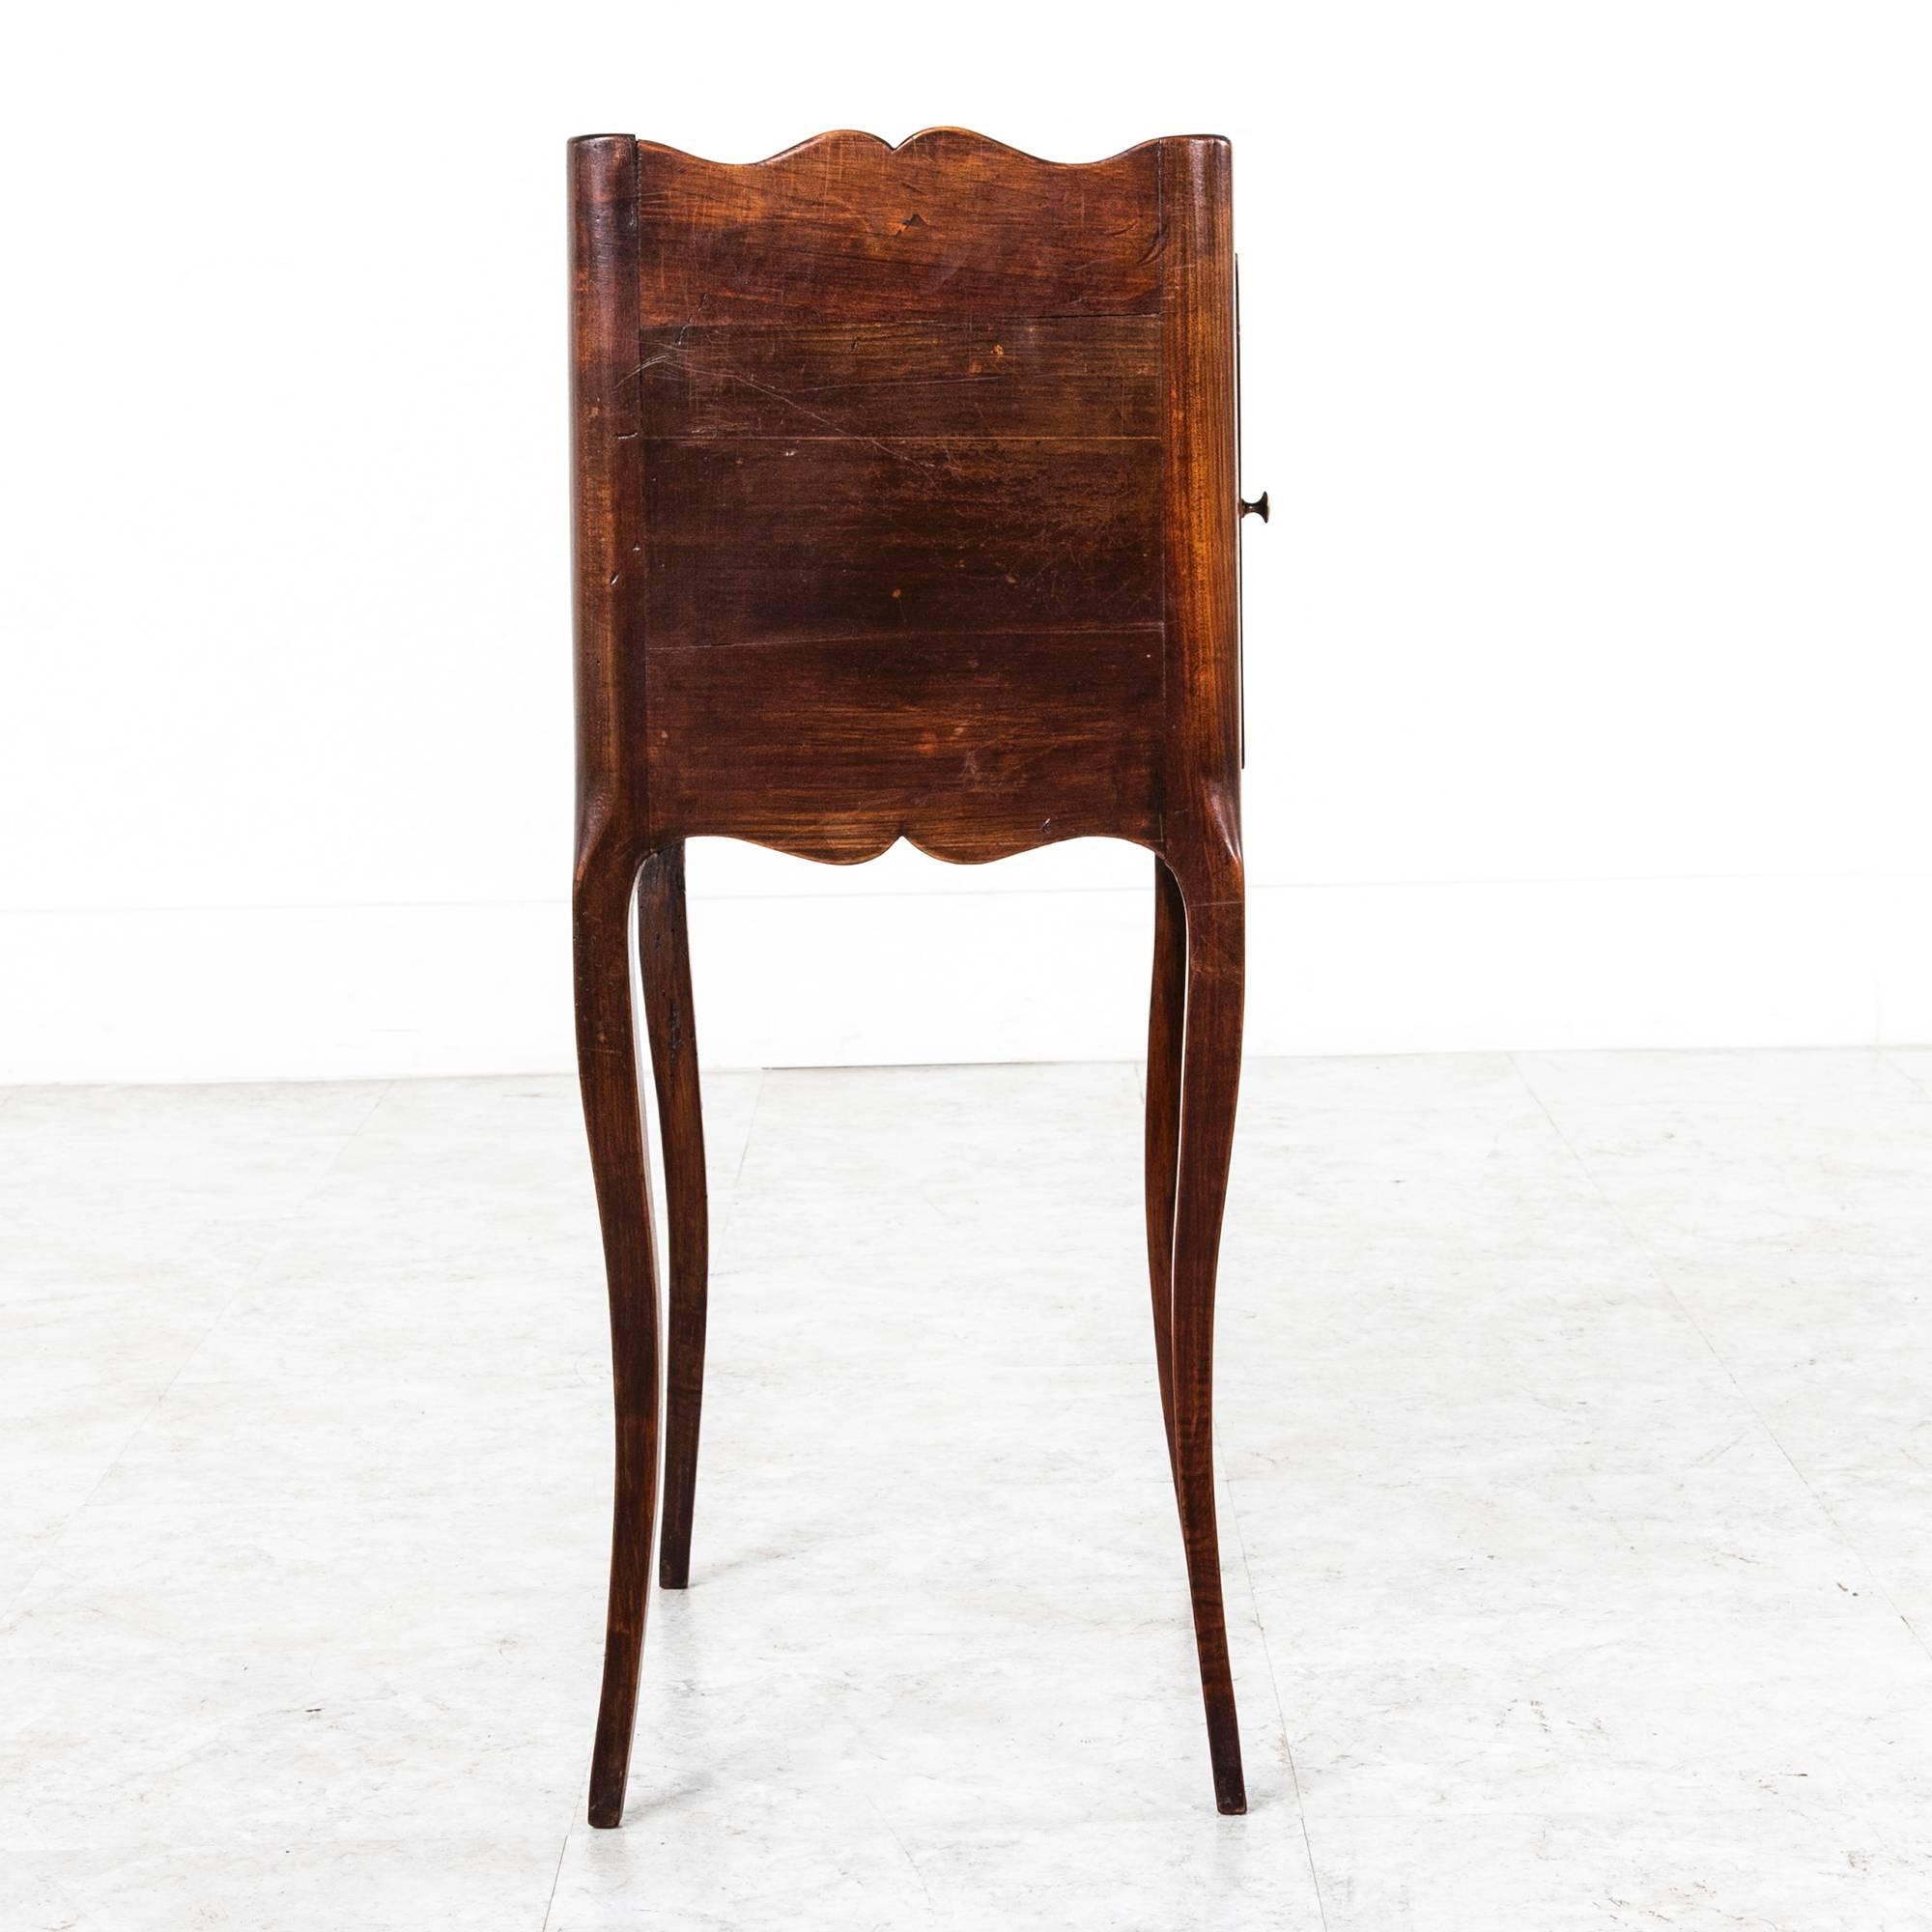 This unusual, hand-carved walnut nightstand from Provence has elegant elongated cabriole legs and a simple profile. A classical hand-carved urn adorns its solid walnut door. Finished on all sides, this piece can be placed in the middle of a room and